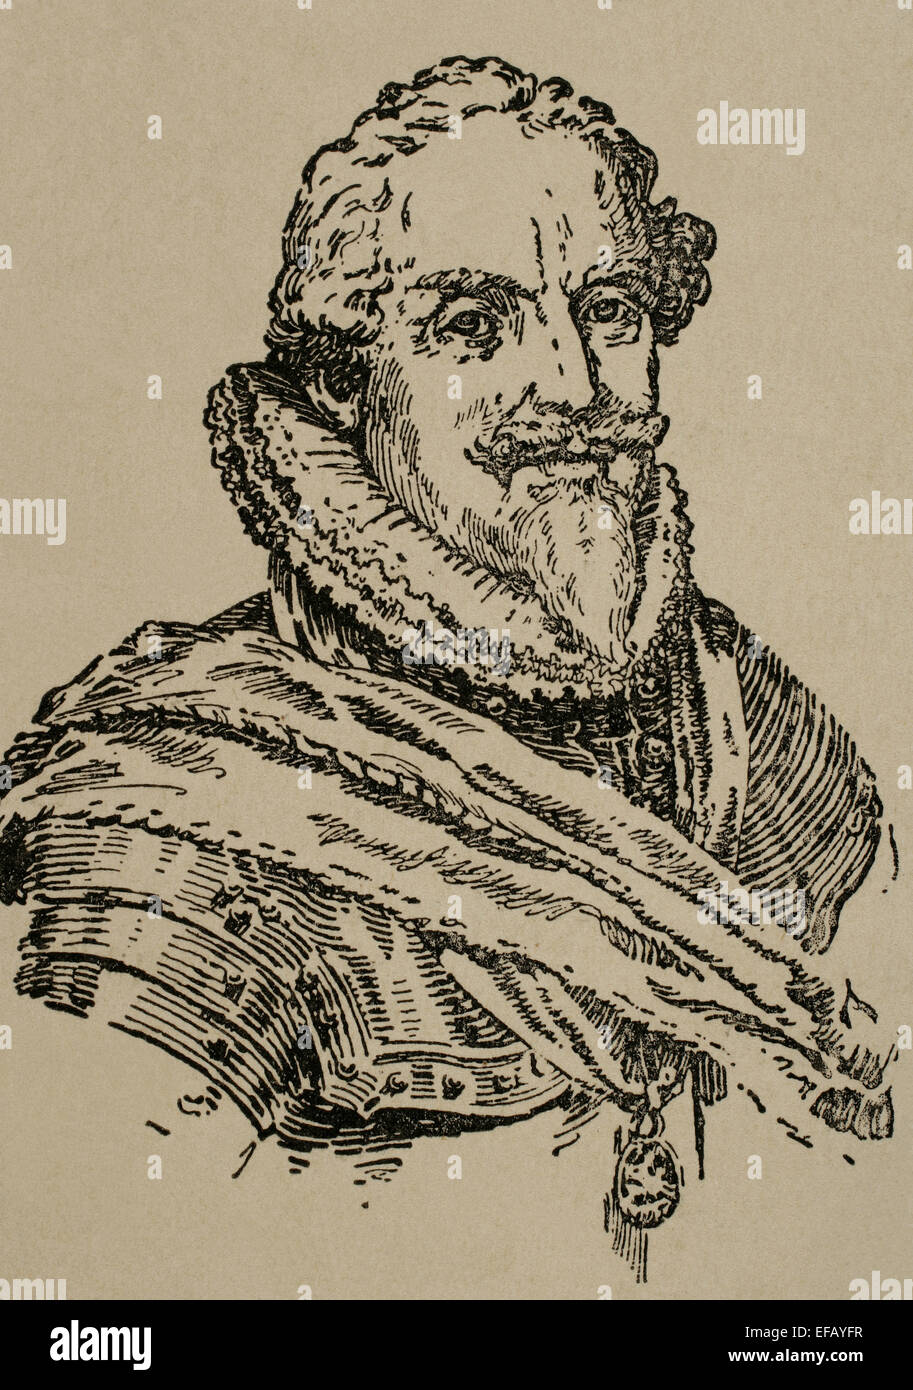 Maurice of Nassau (1567-1625). Prince of Orange from 1618 and stadtholder of the United Provinces of the Netherlands (except in the province of Friesland) from earliest 1585 until his death in 1625. Portrait in 'La Ilustracion Española y Americana'. Engraving, 1876. Stock Photo